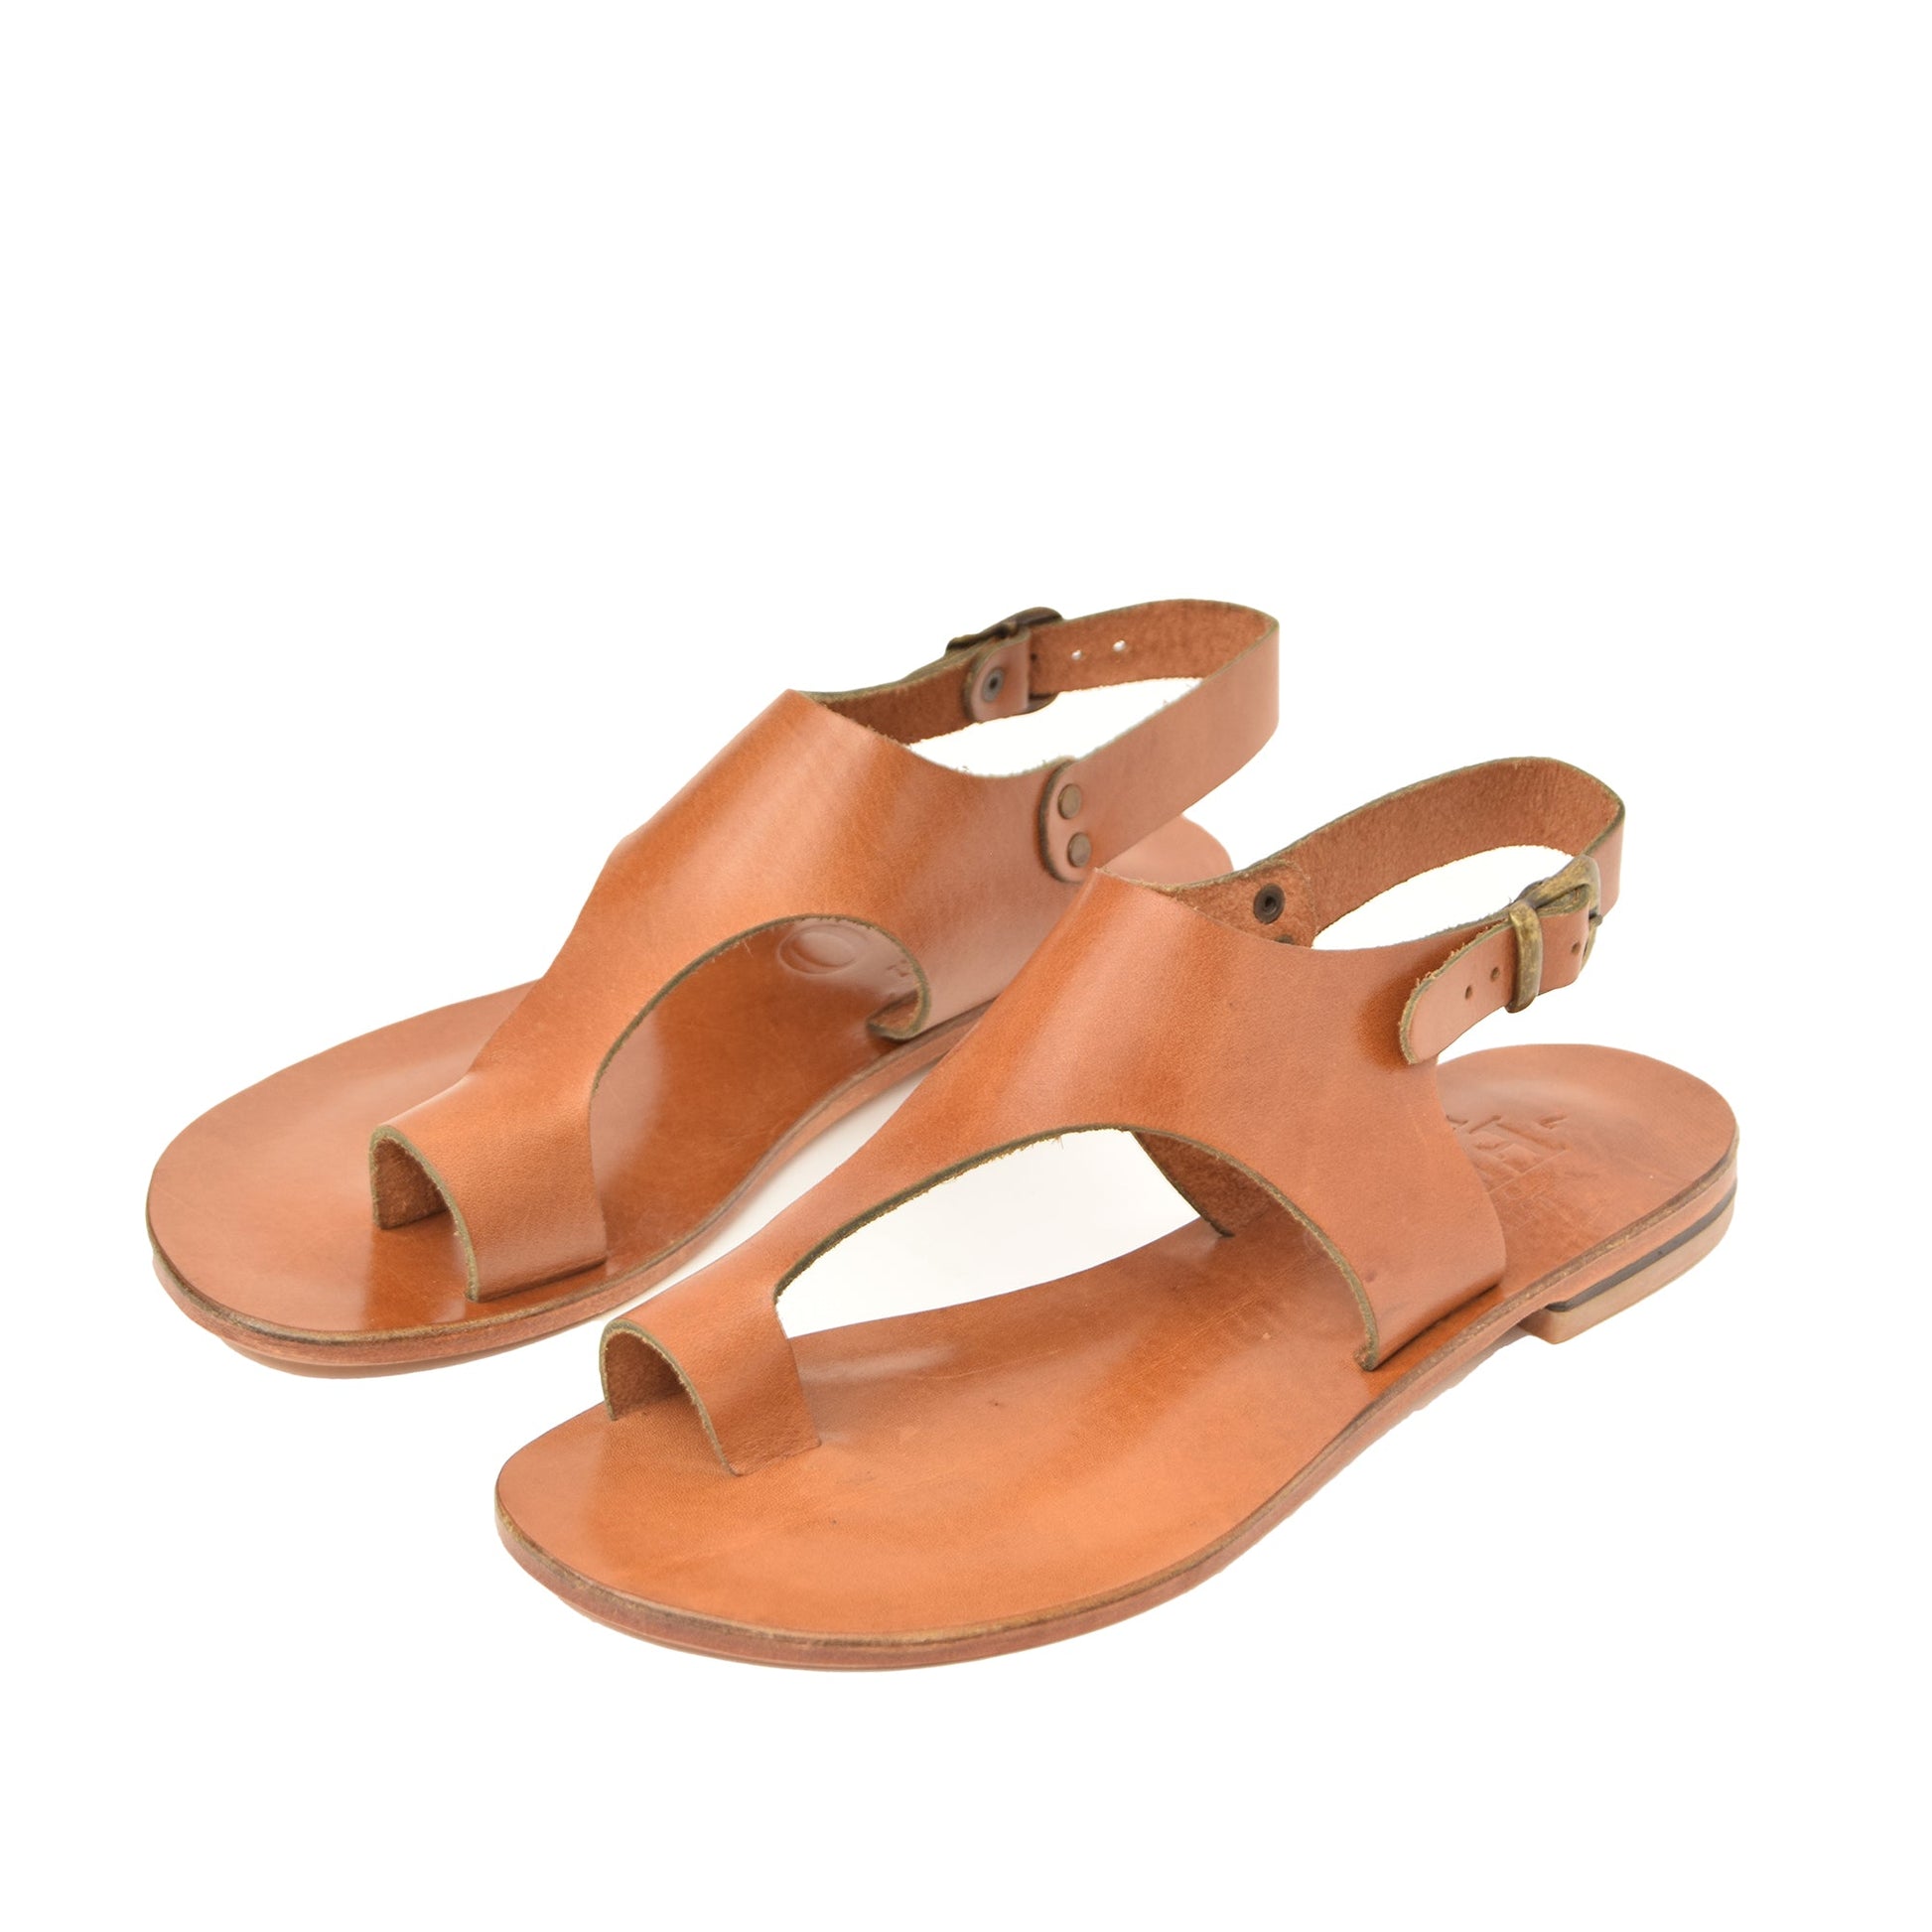 Theia Tan Leather Women’s Flat Sandals - Handmade Sandal, Low Heel Strapped Travel Comfortable Sandal